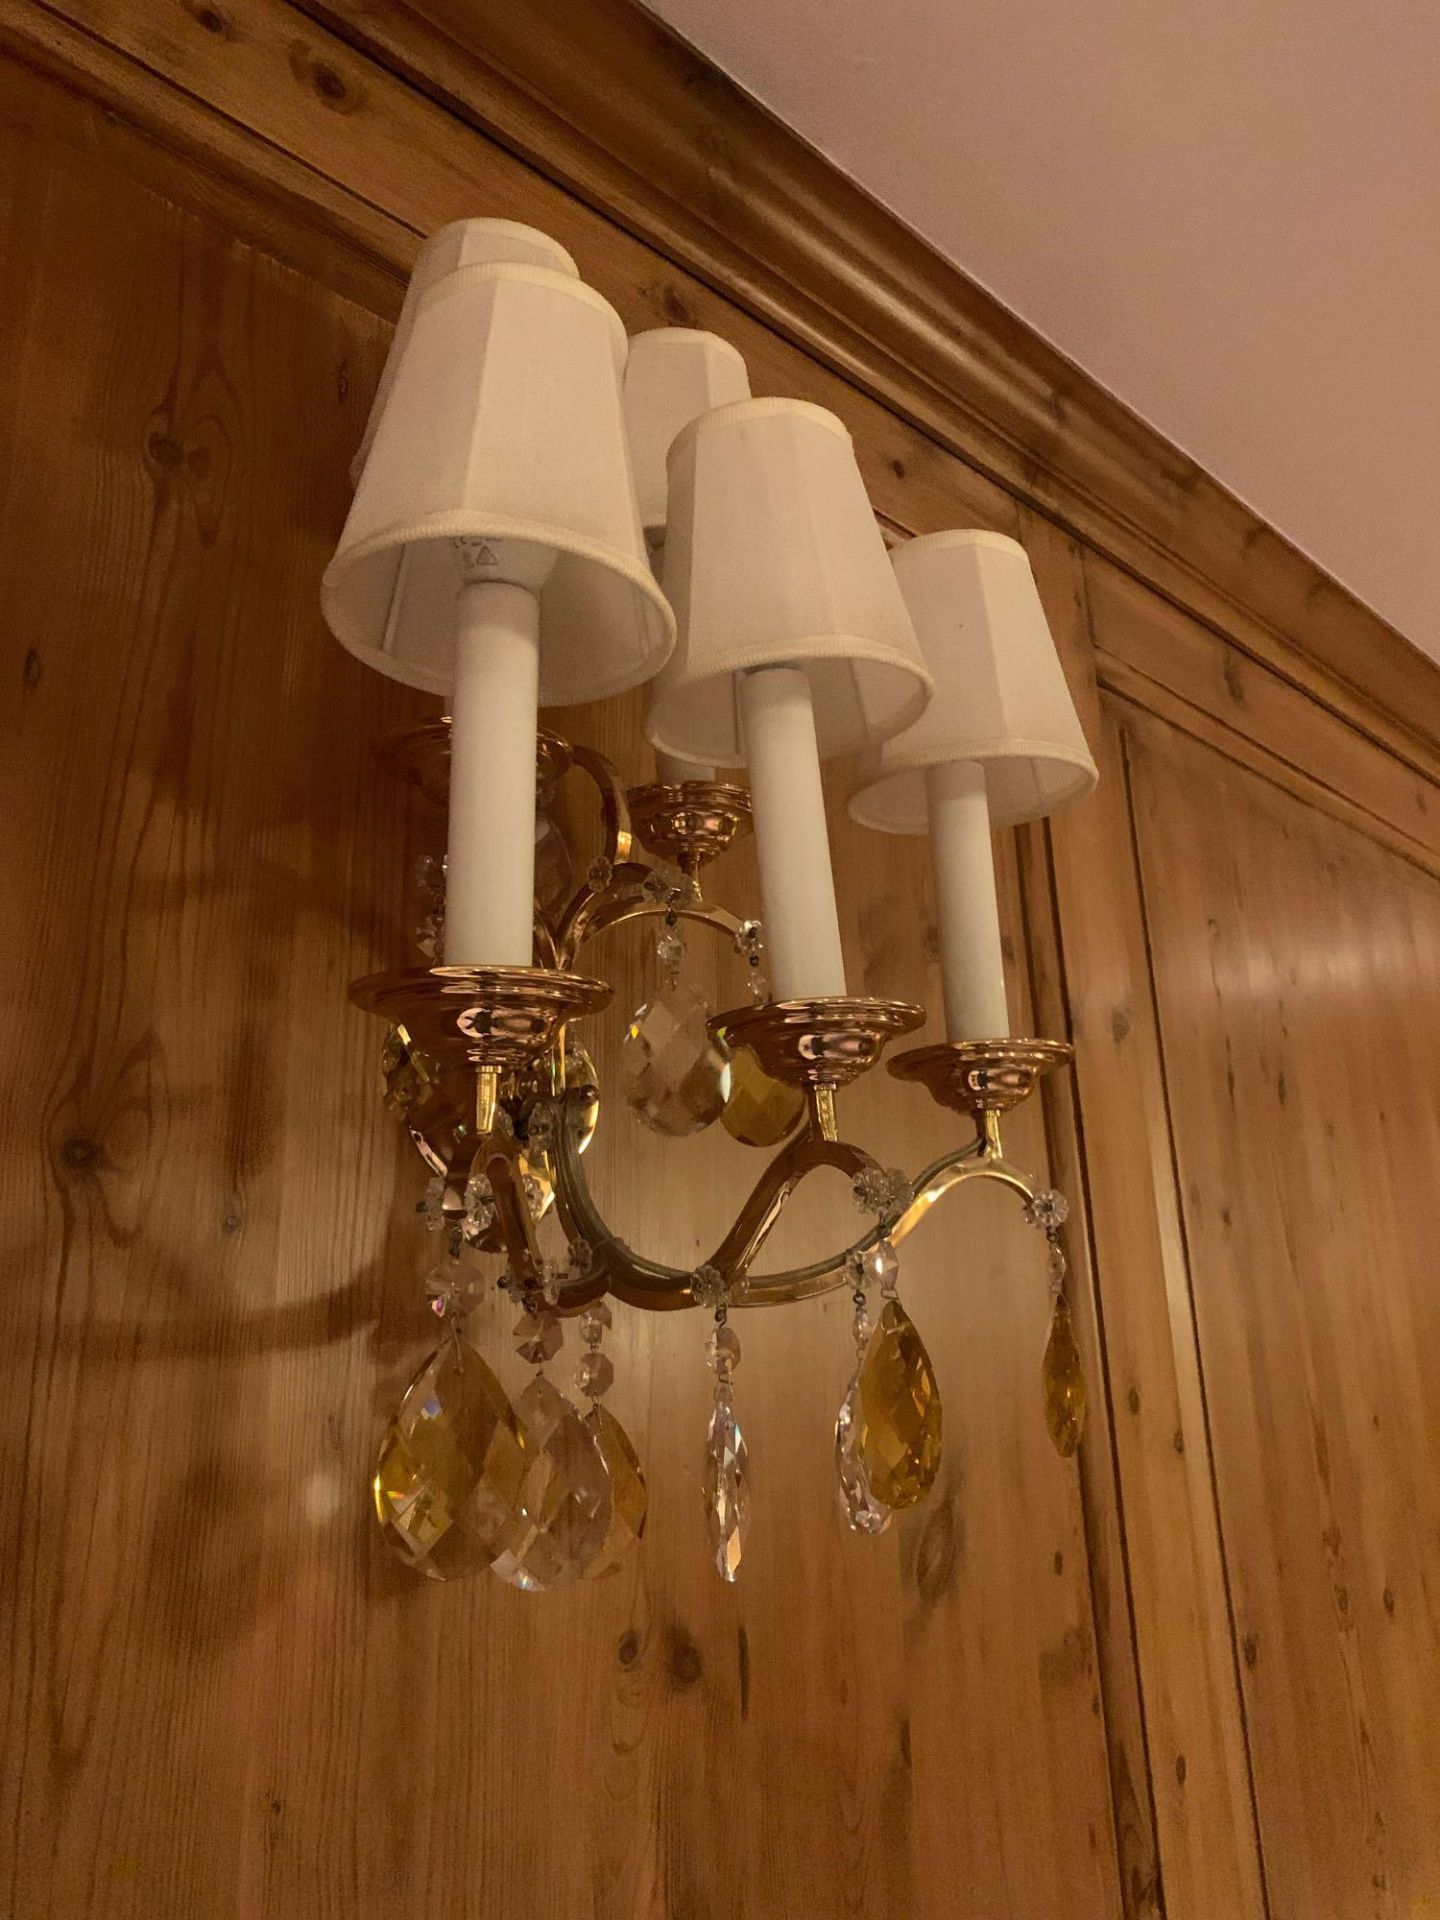 A Pair Of Five Arm Brass Wall Sconce With Linen Shades Droplets Amber And Clear Crystal Glass. 35x - Image 2 of 4